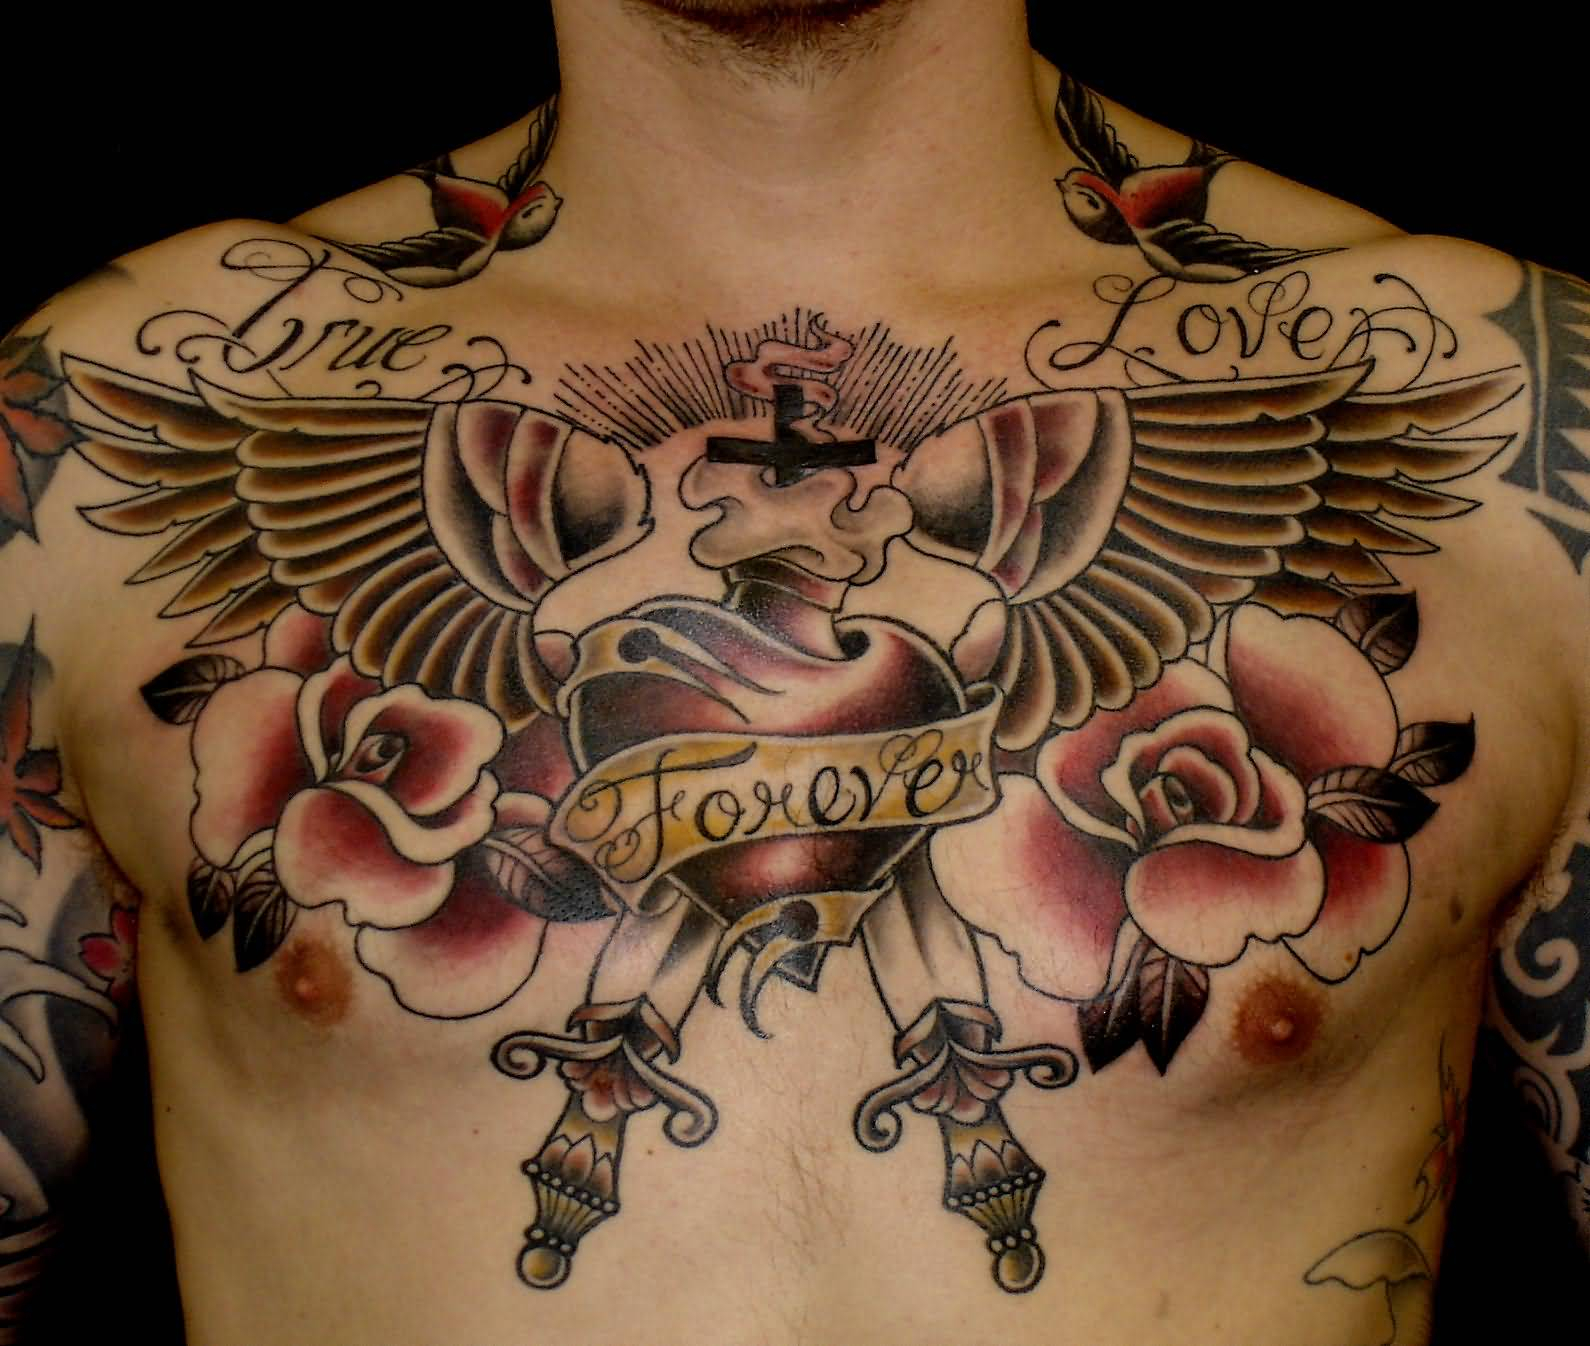 Awesome Memorial Old School Tattoo On Chest in dimensions 1590 X 1346